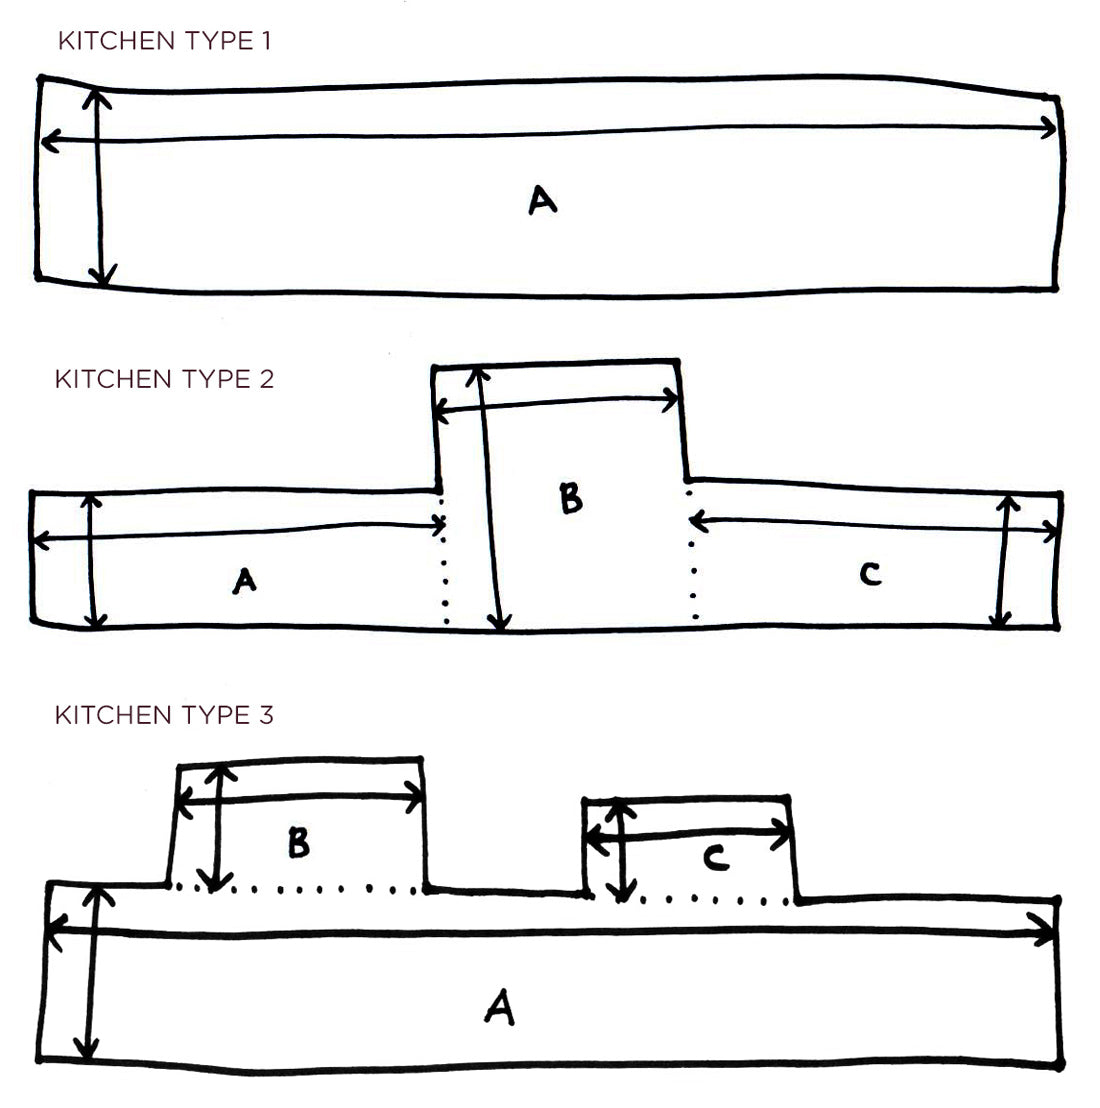 HowToMeasure-01 How to Measure Your Kitchen Backsplash All   Kitchen-Drawing How to Measure Your Kitchen Backsplash All   whatyoullneed How to Measure Your Kitchen Backsplash All   kitchen-types2 How to Measure Your Kitchen Backsplash All